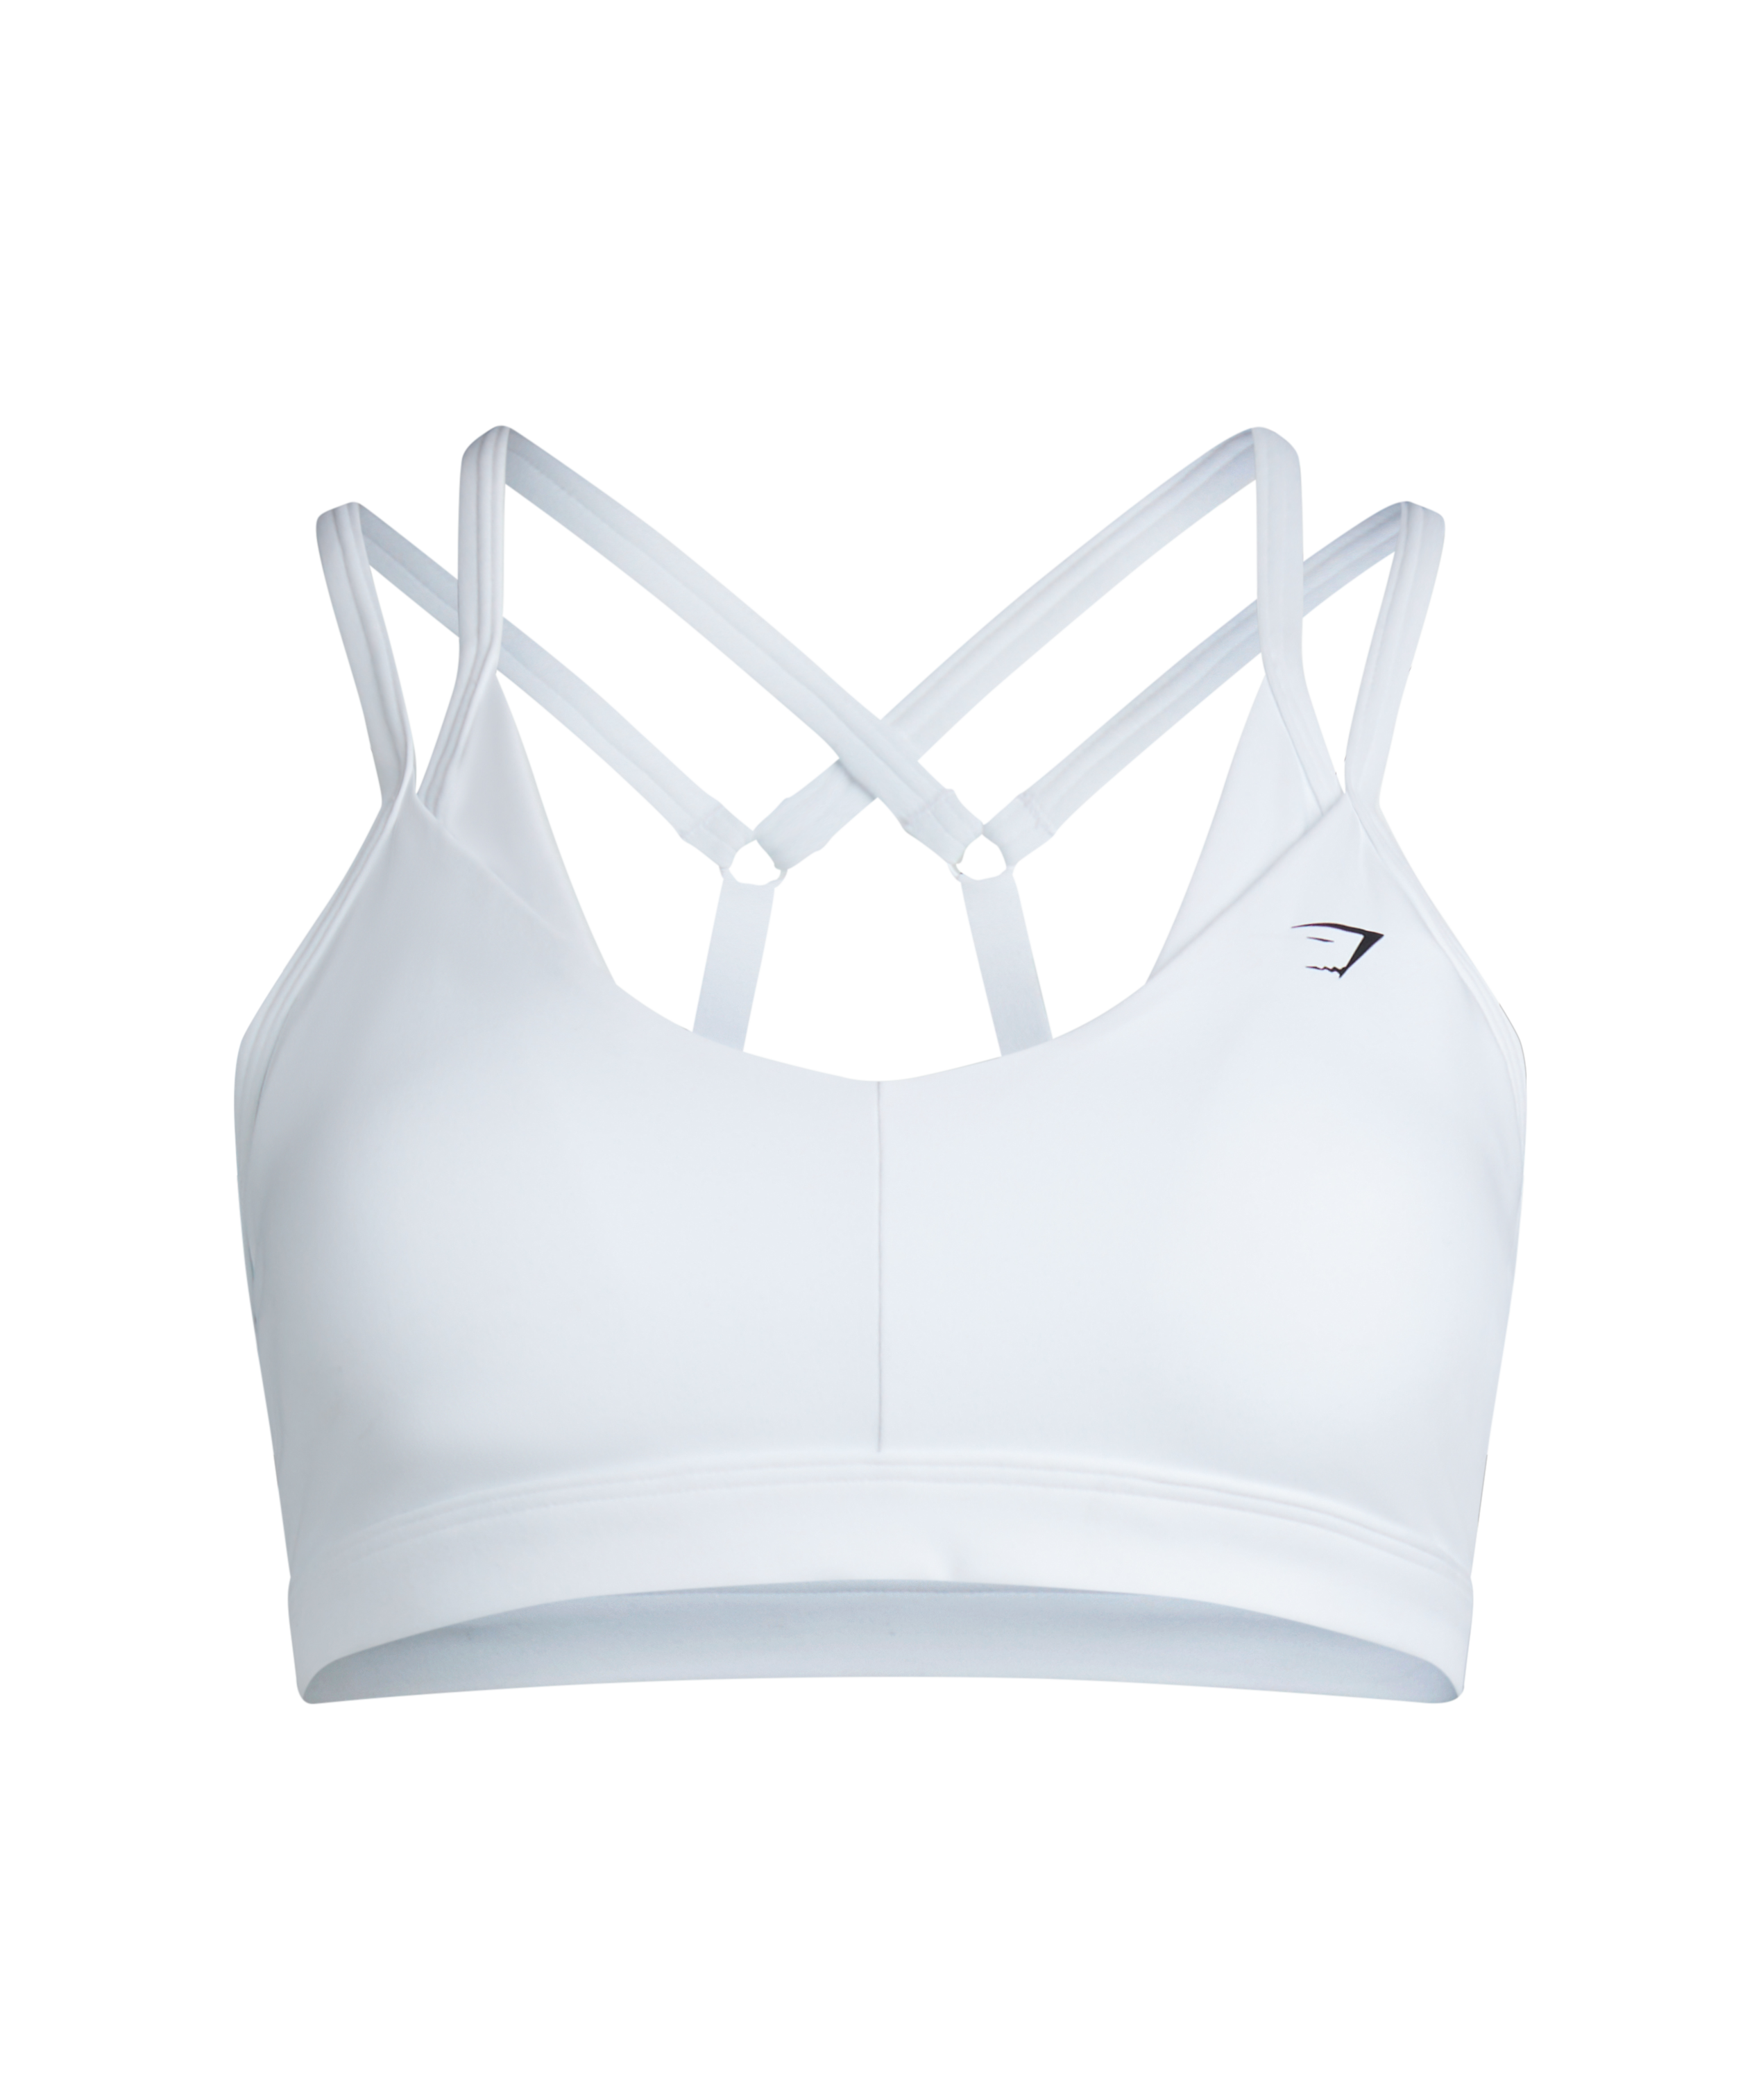 Double Up Sports Bra in White - view 7